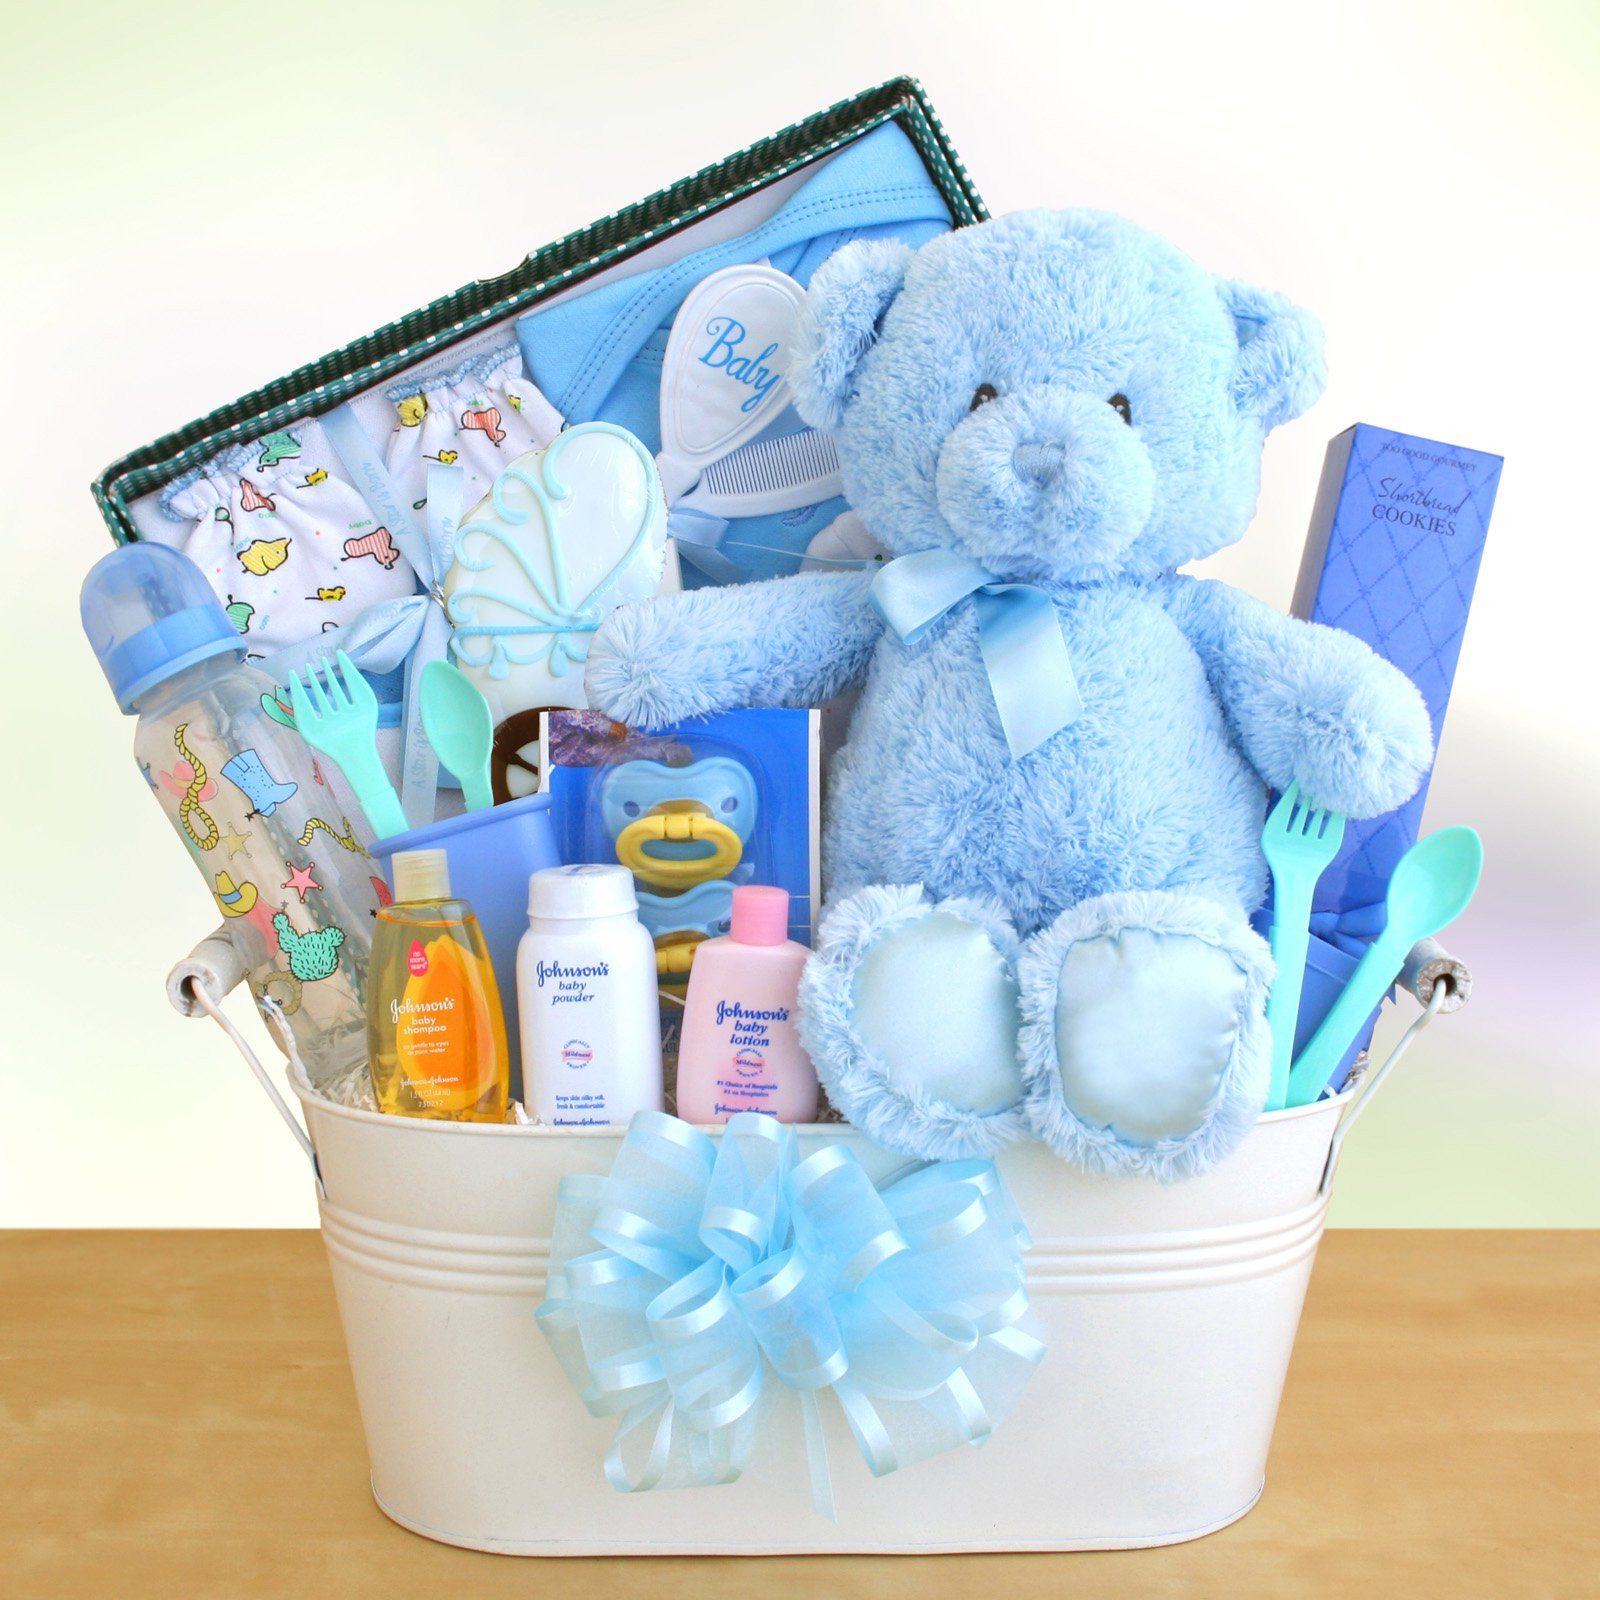 Baby Shower Gift Ideas For Boys
 New Arrival Baby Boy Gift Basket Gift Baskets by